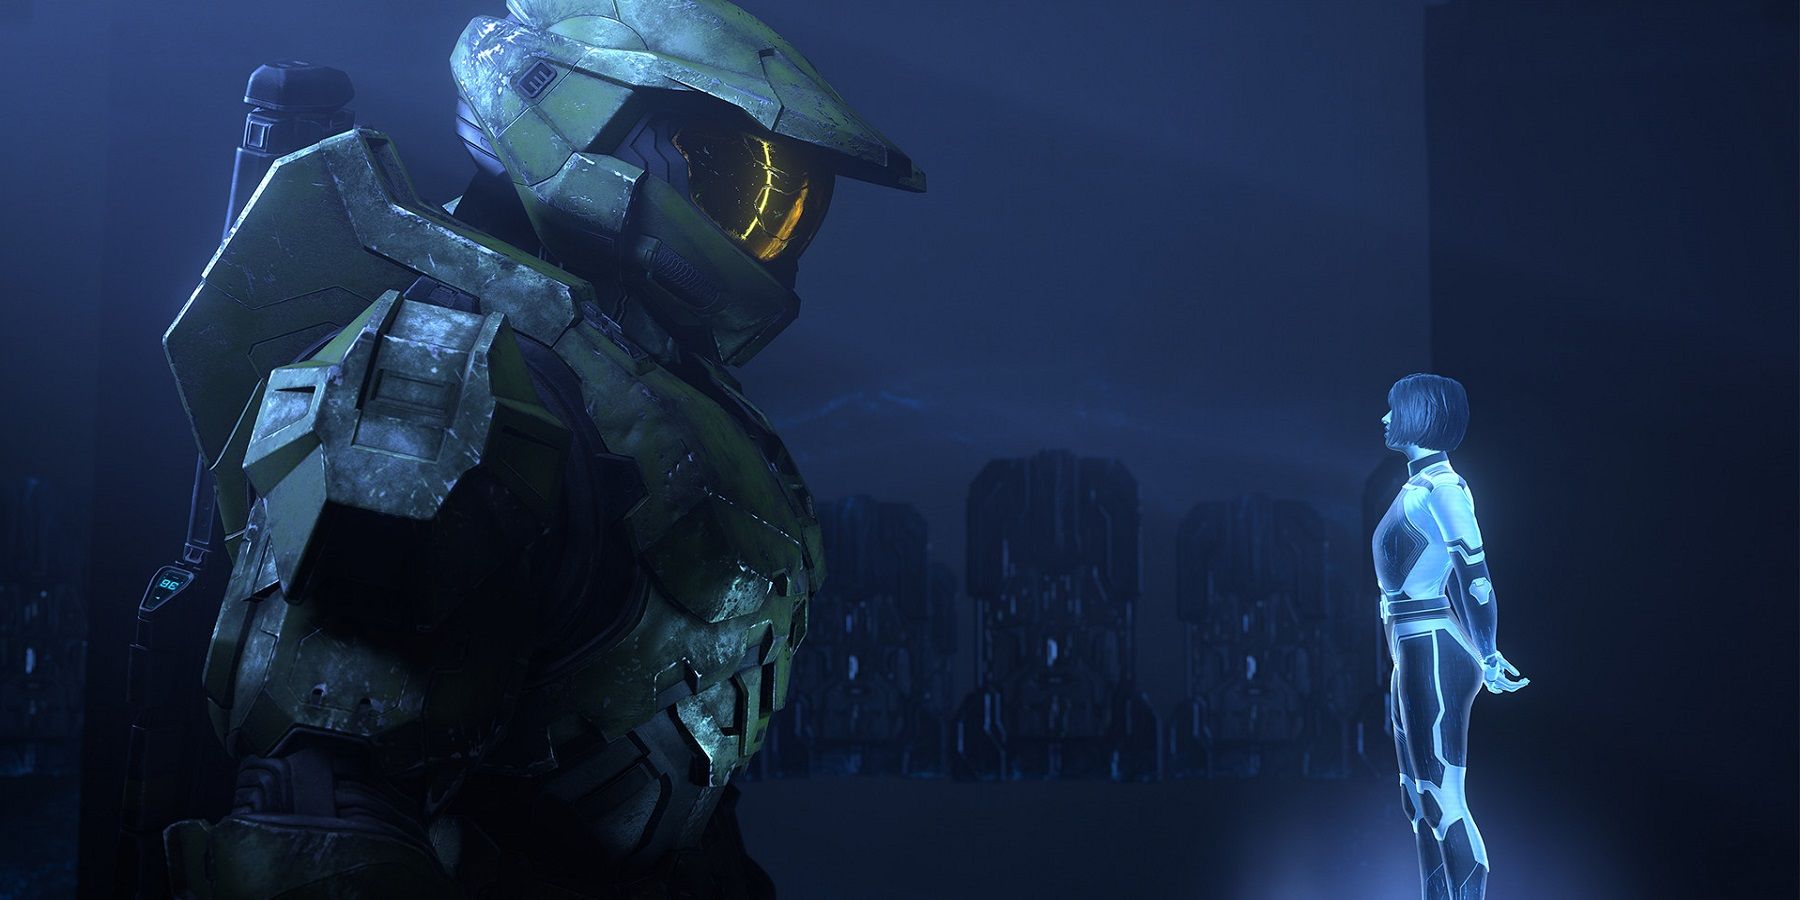 A Halo player has given the real names to some characters in a new Reddit post.